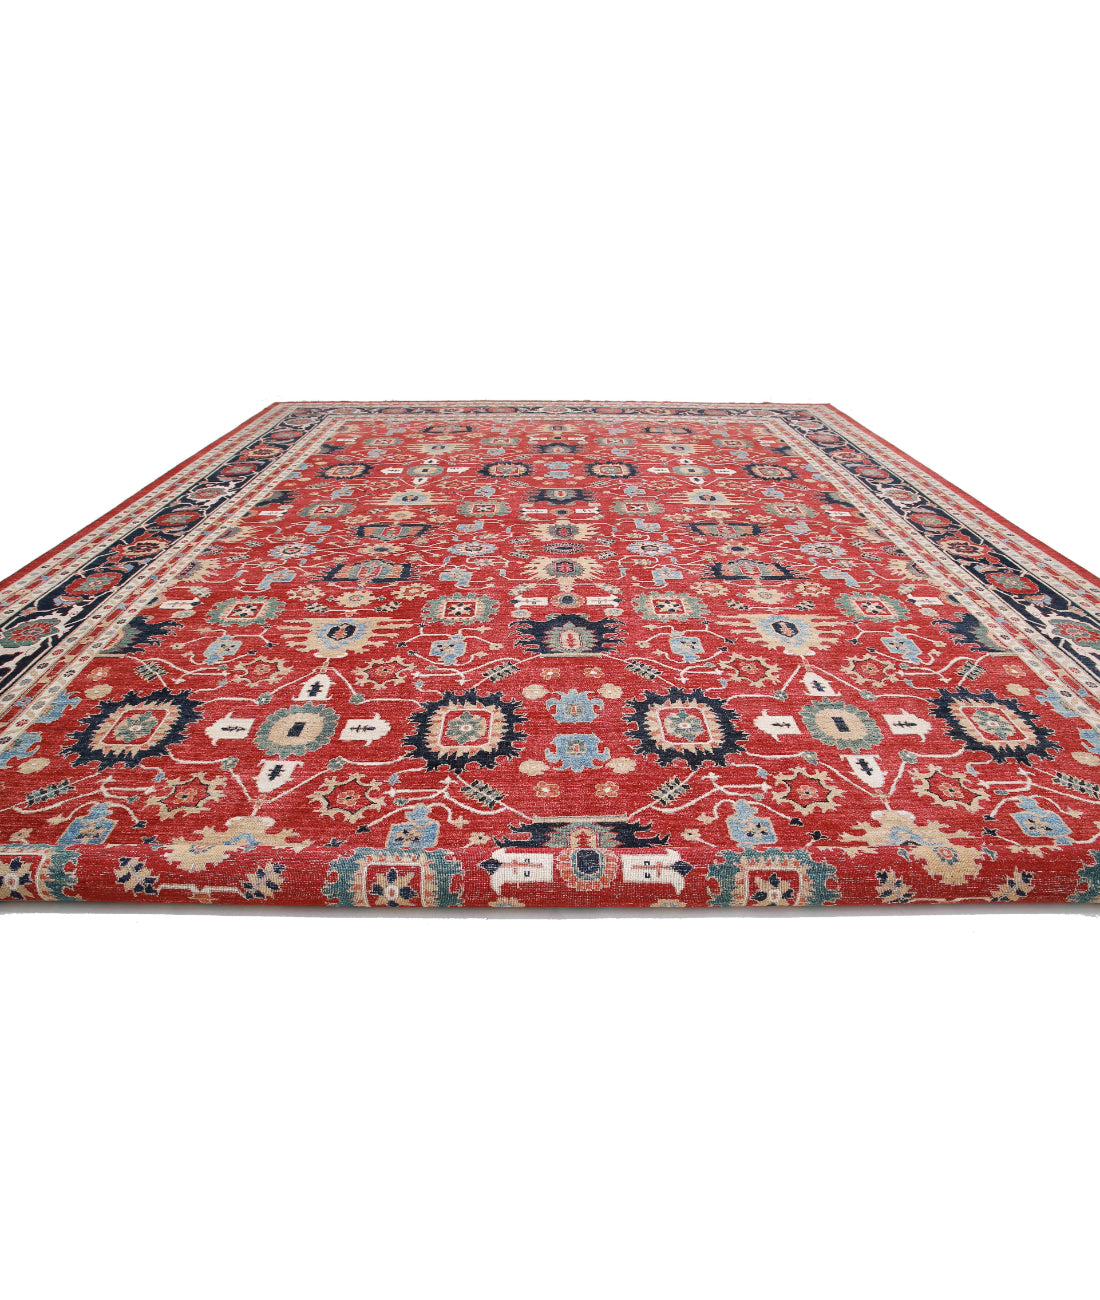 Heriz 17'8'' X 25'9'' Hand-Knotted Wool Rug 17'8'' x 25'9'' (530 X 773) / Red / Blue